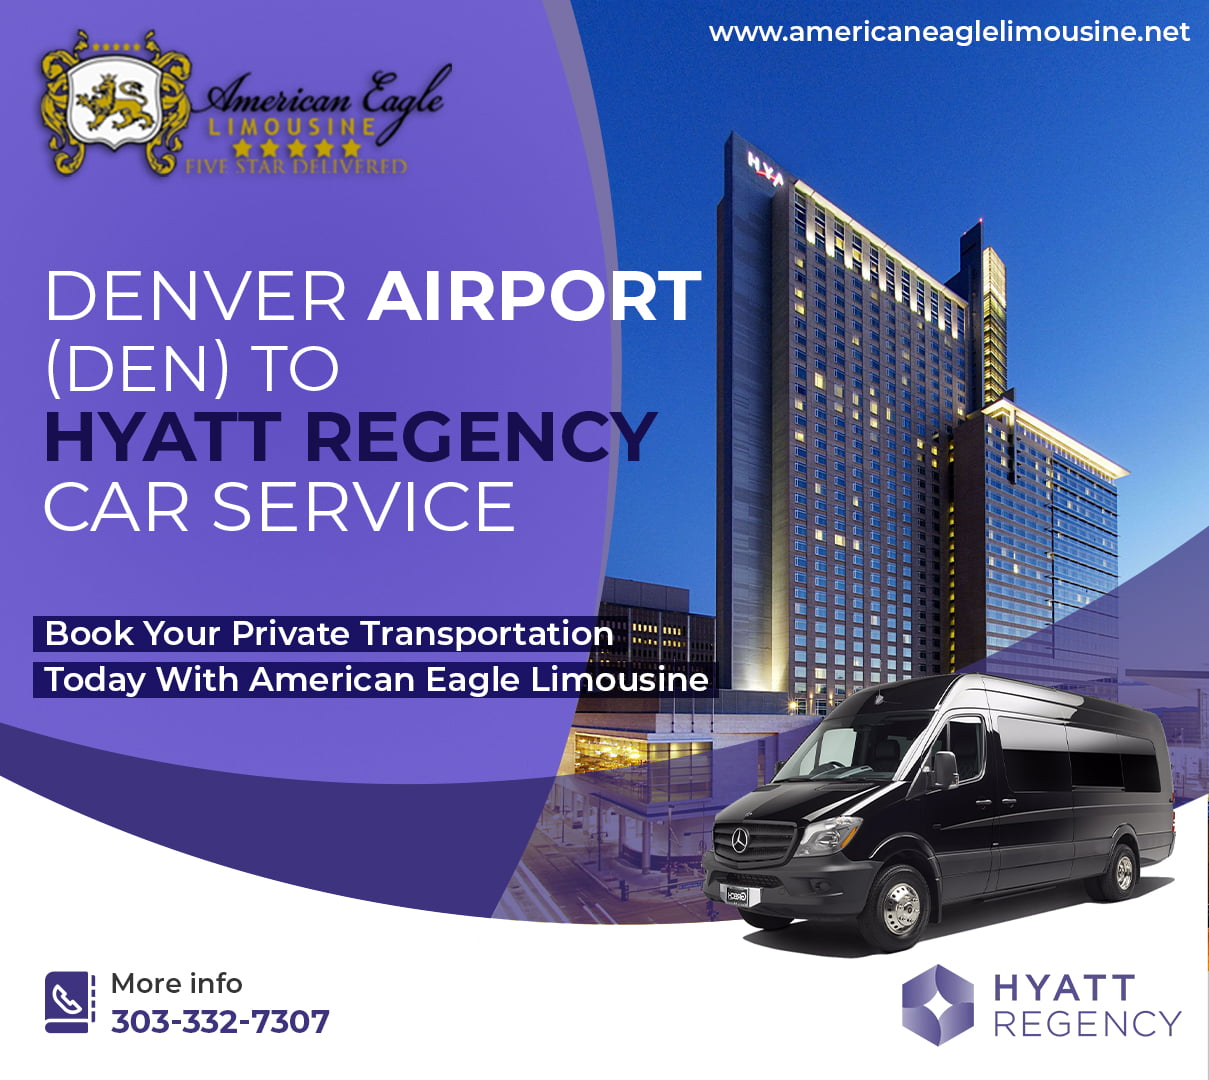 You are currently viewing The cheapest way to get from Denver Airport (DEN) to Hyatt Regency Hotel Denver Private Shuttle.